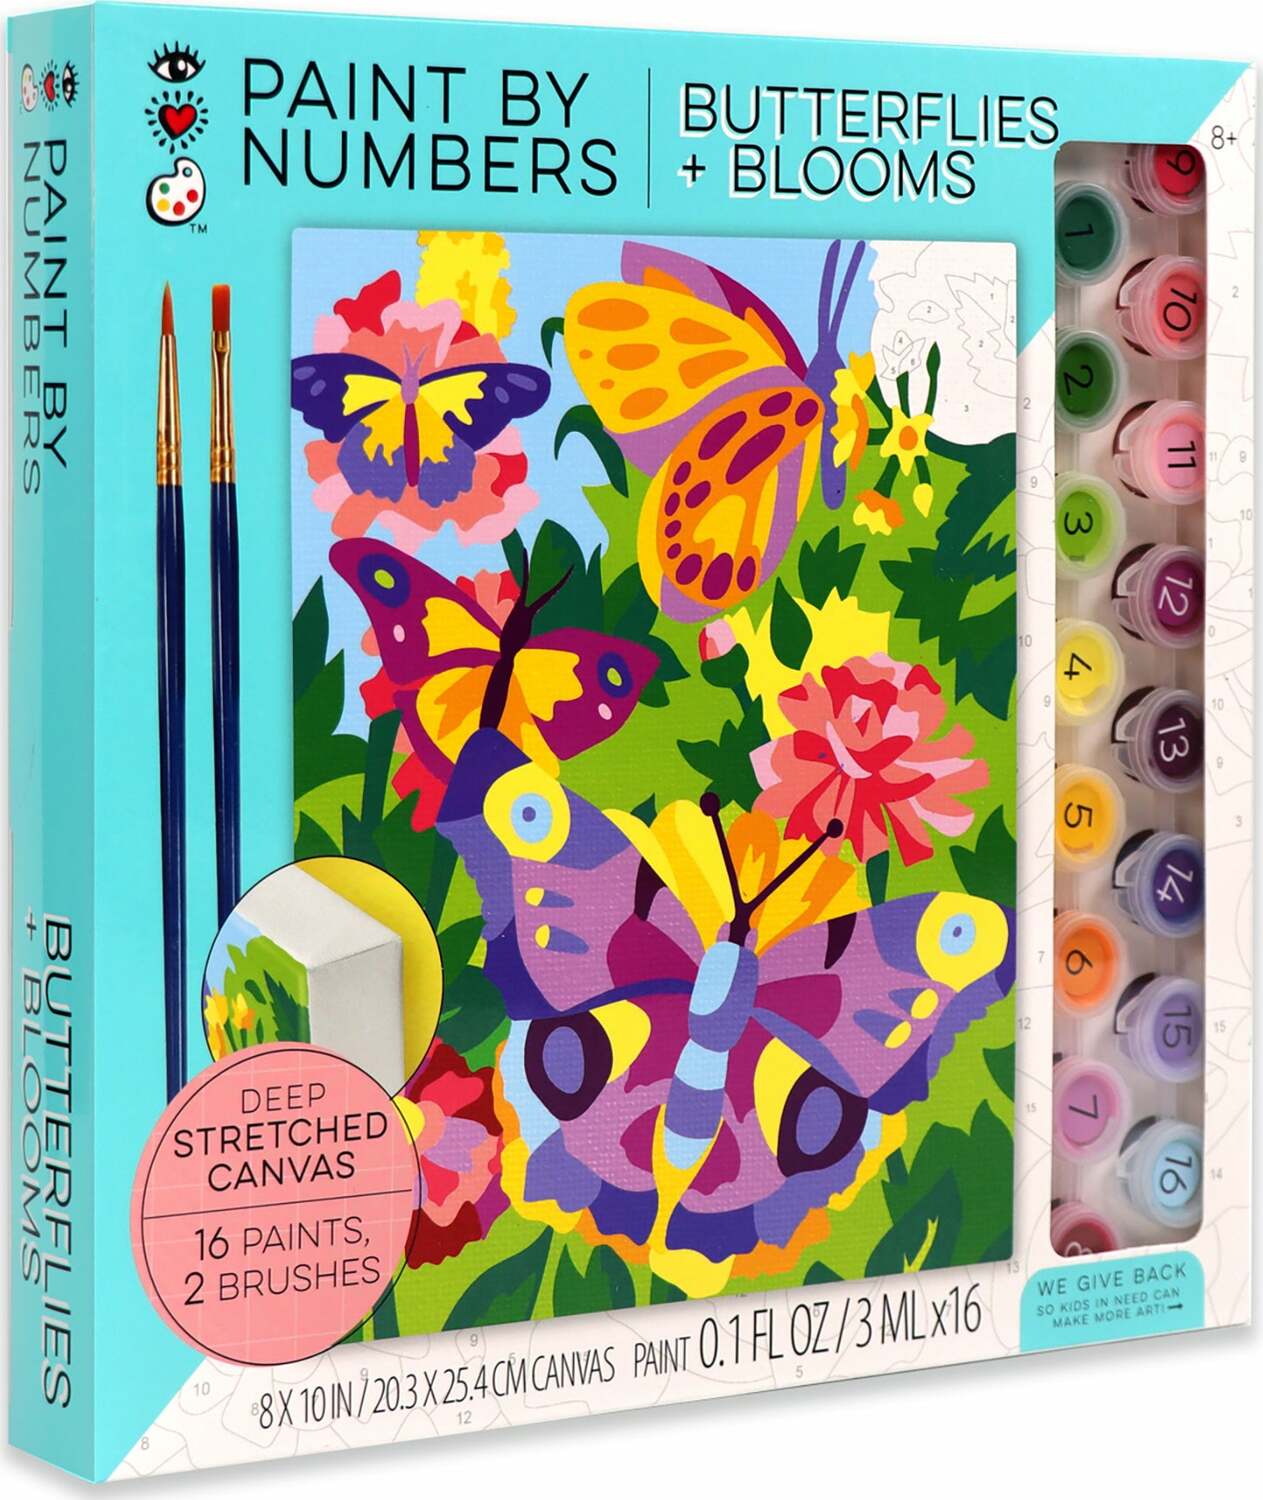 Butterflies and Blooms Paint by Number - Mudpuddles Toys and Books